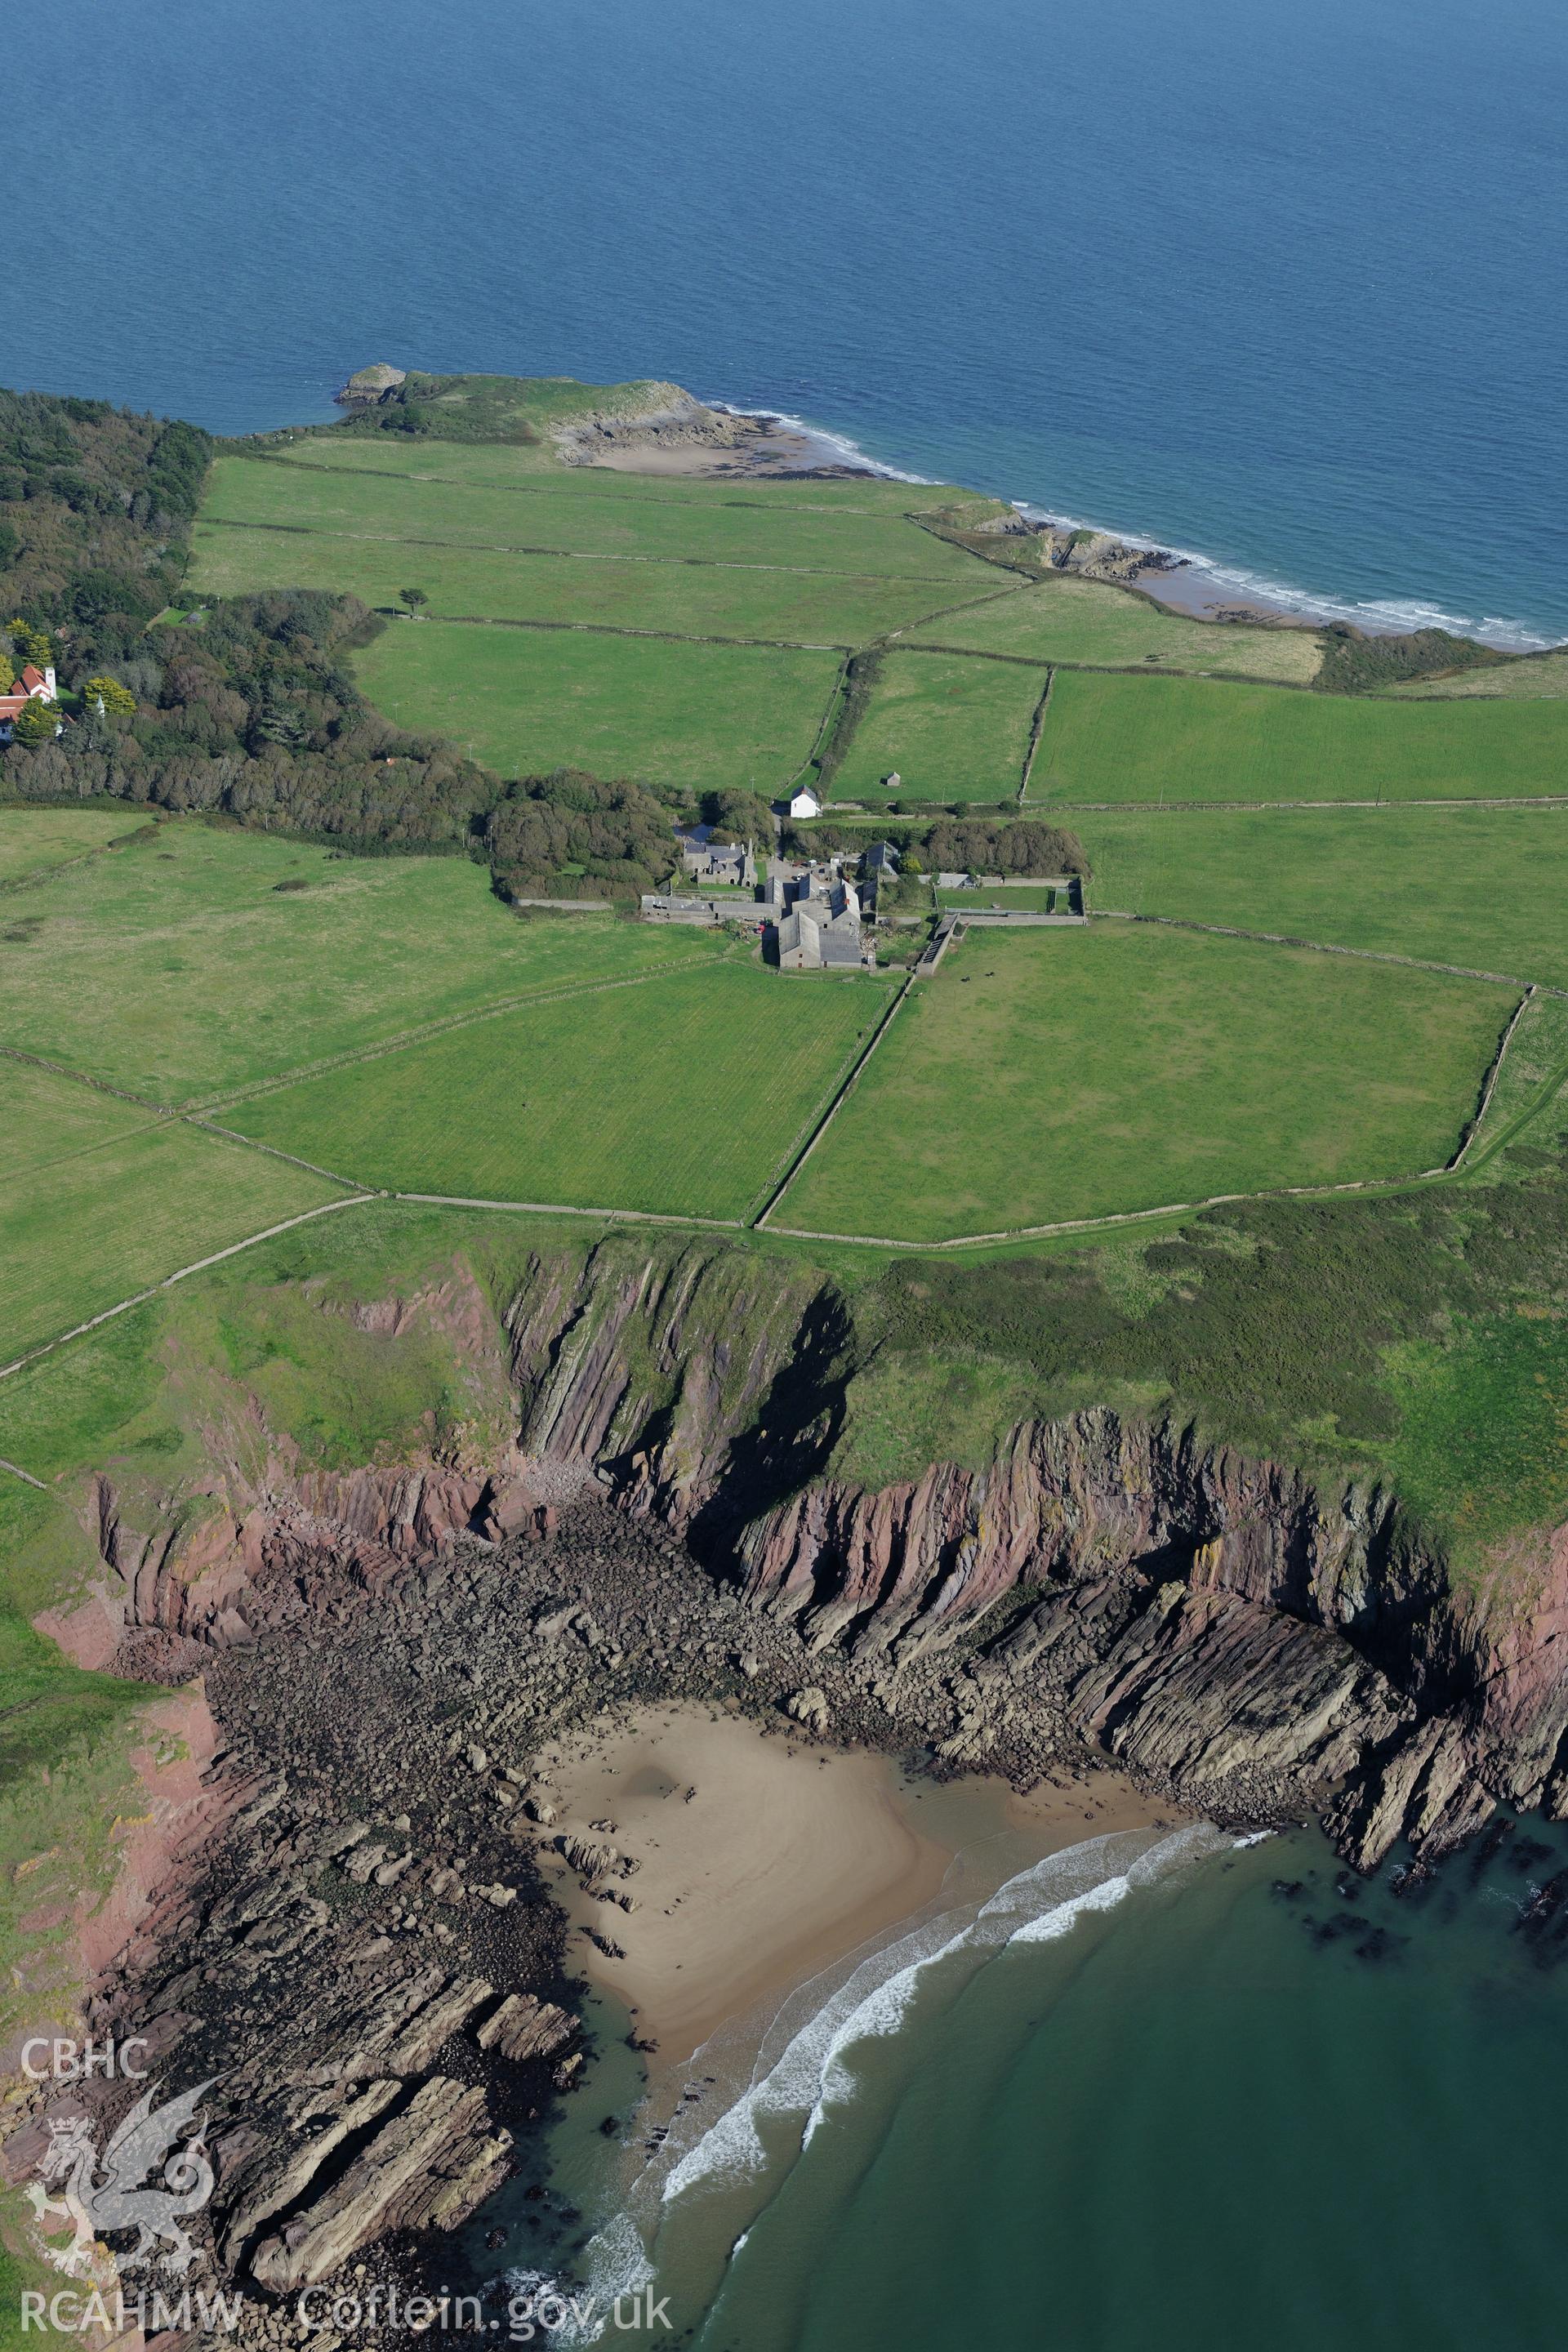 St. Mary's priory and the Old Priory Guest House on Caldey Island, off the south western coast of Tenby. Oblique aerial photograph taken during the Royal Commission?s programme of archaeological aerial reconnaissance by Toby Driver on 30th September 2015.